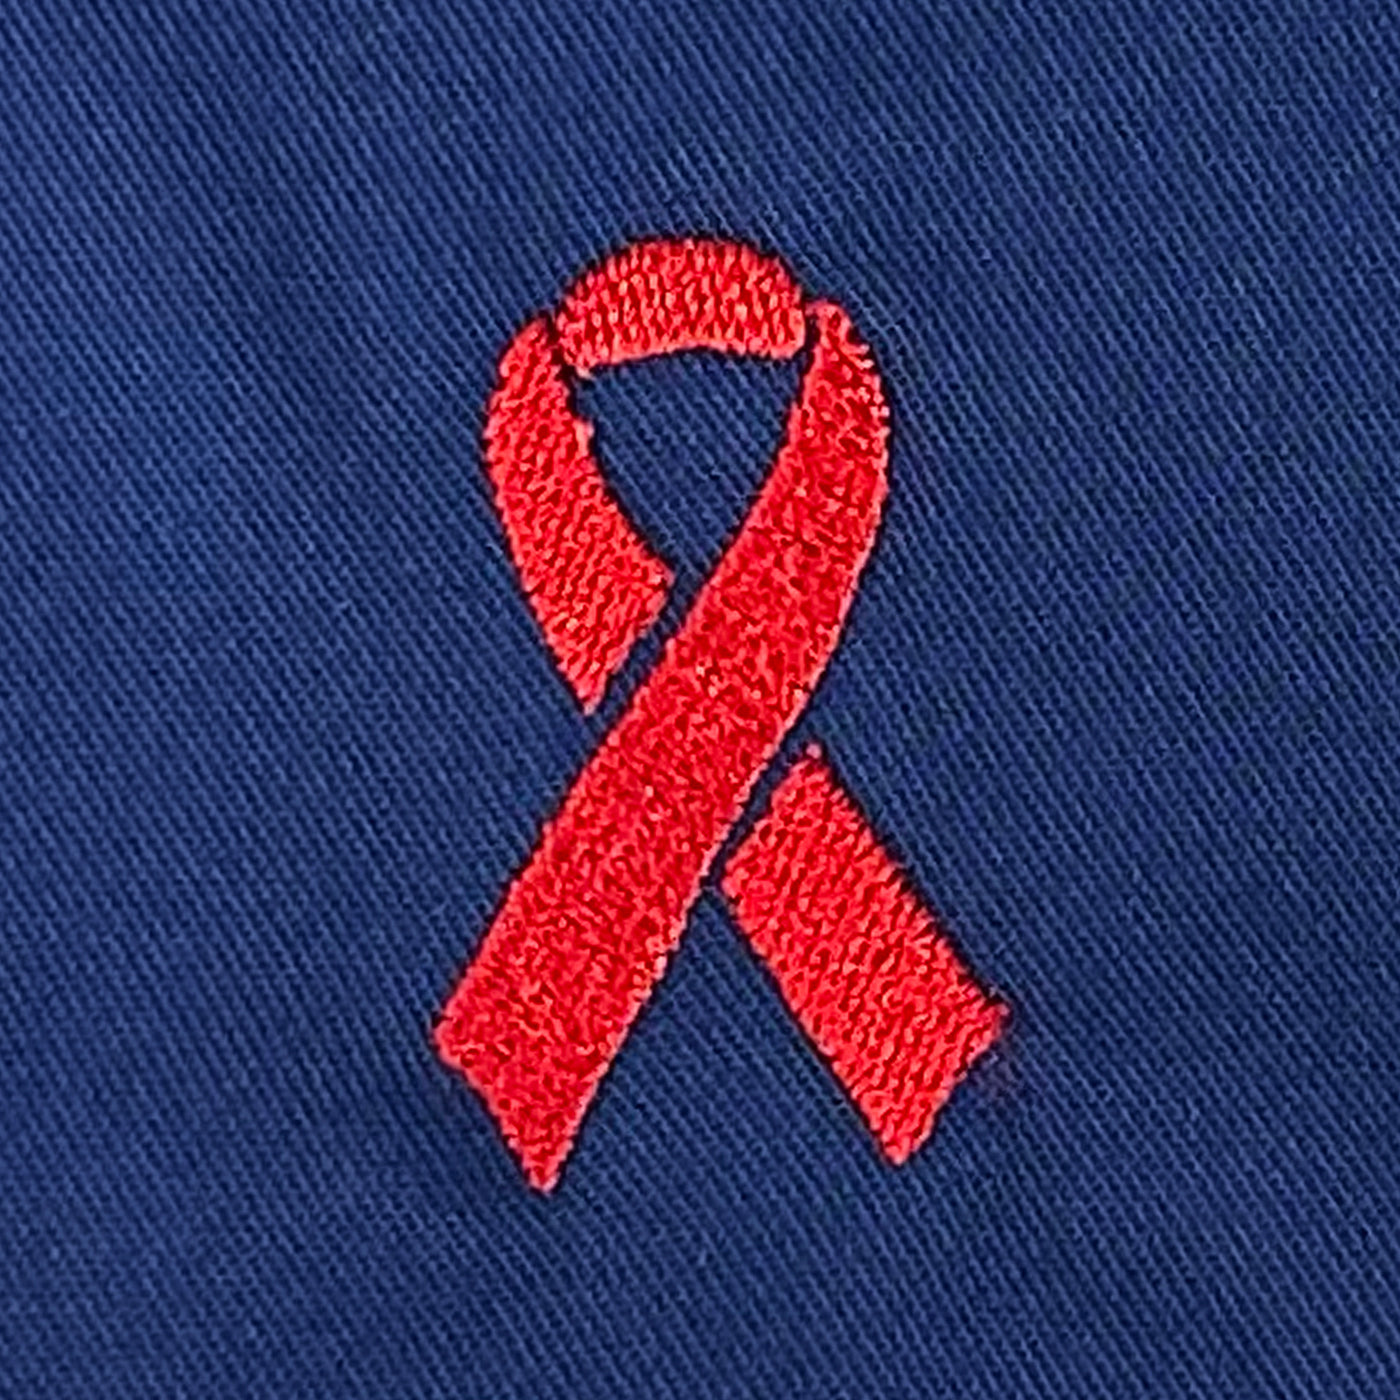 Embroidery Stock Logos - Red Ribbon